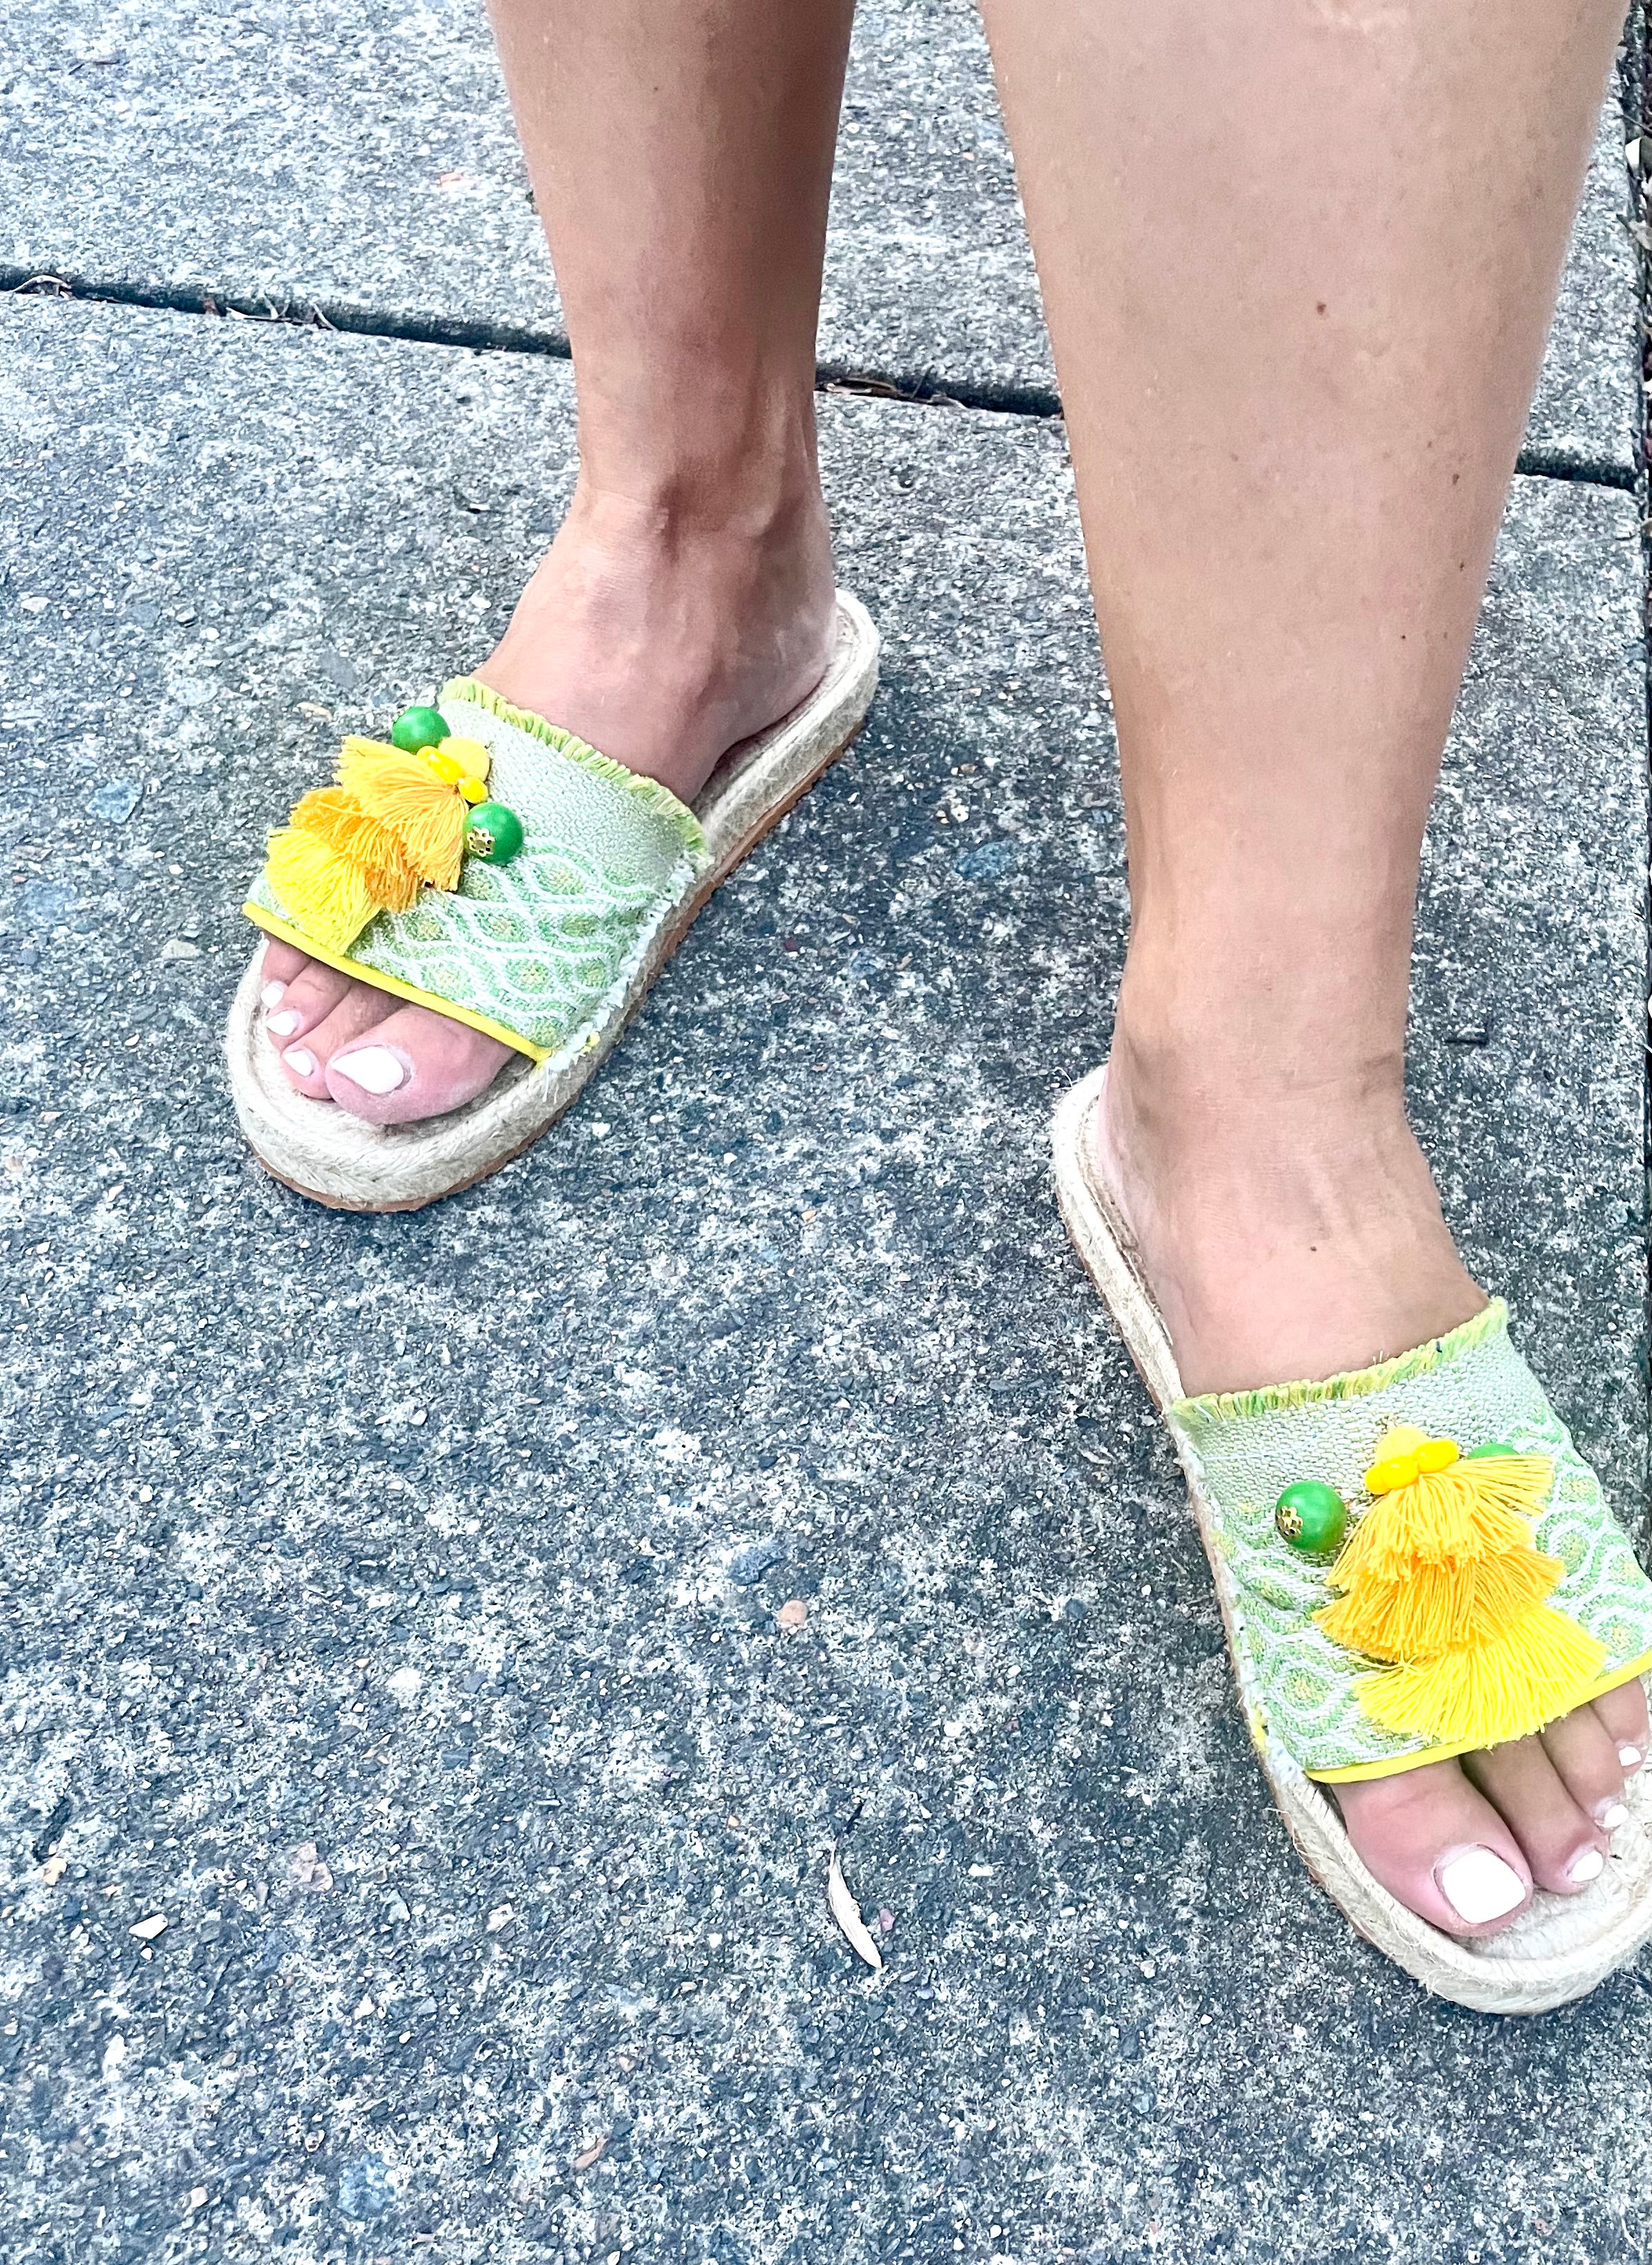 Hand crafted espadrilles - one of a kind. Size 39.  Designed using a beautiful lemon and chartreuse woven fabric with yellow ombre tassel and beads.  Fabric lined upper, rubber non slip sole.